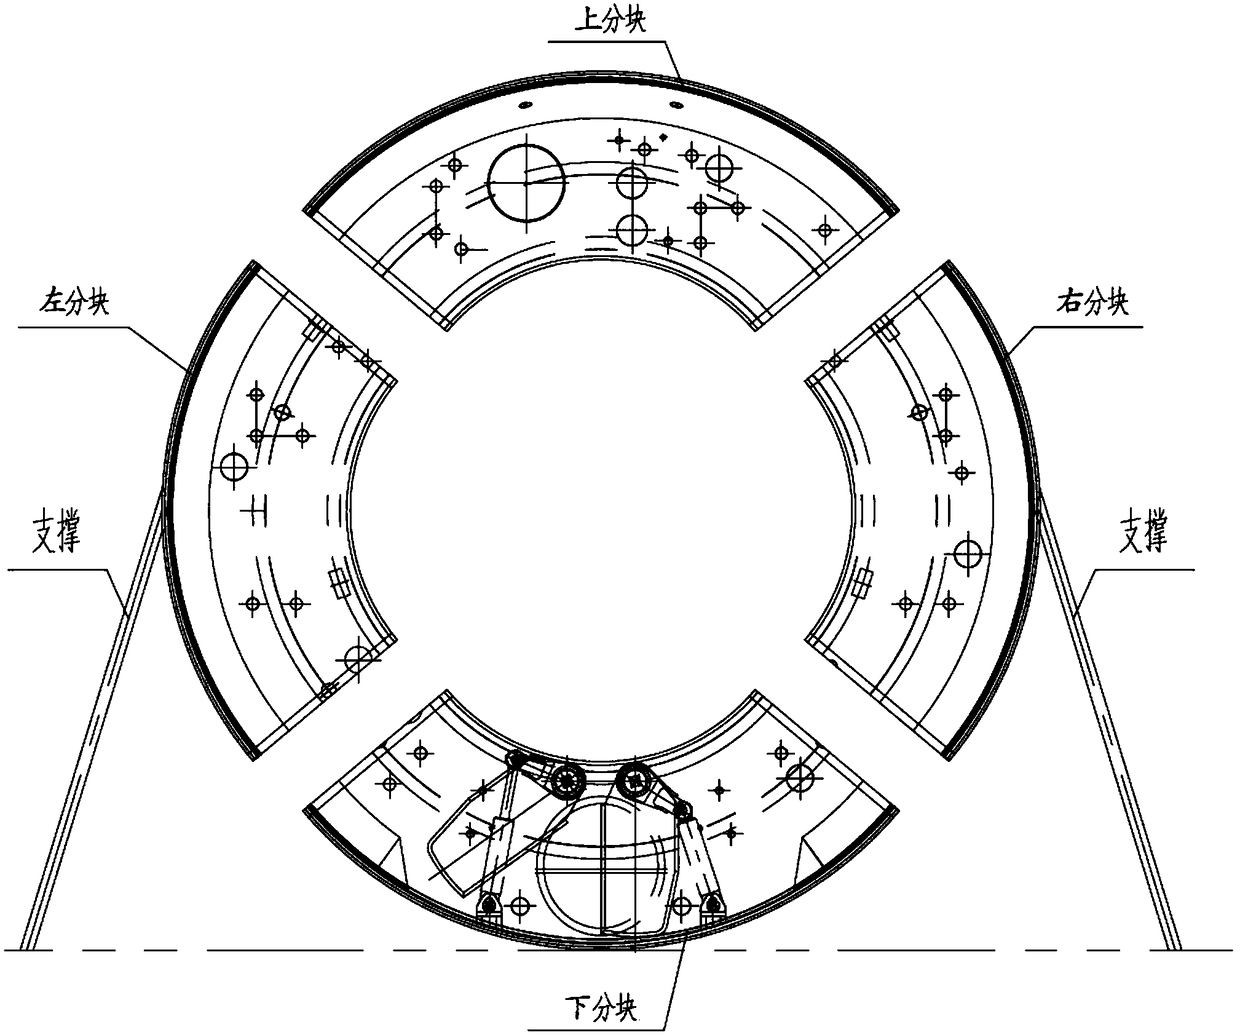 Construction method for disassembling of shield tunneling machine in narrow and small space